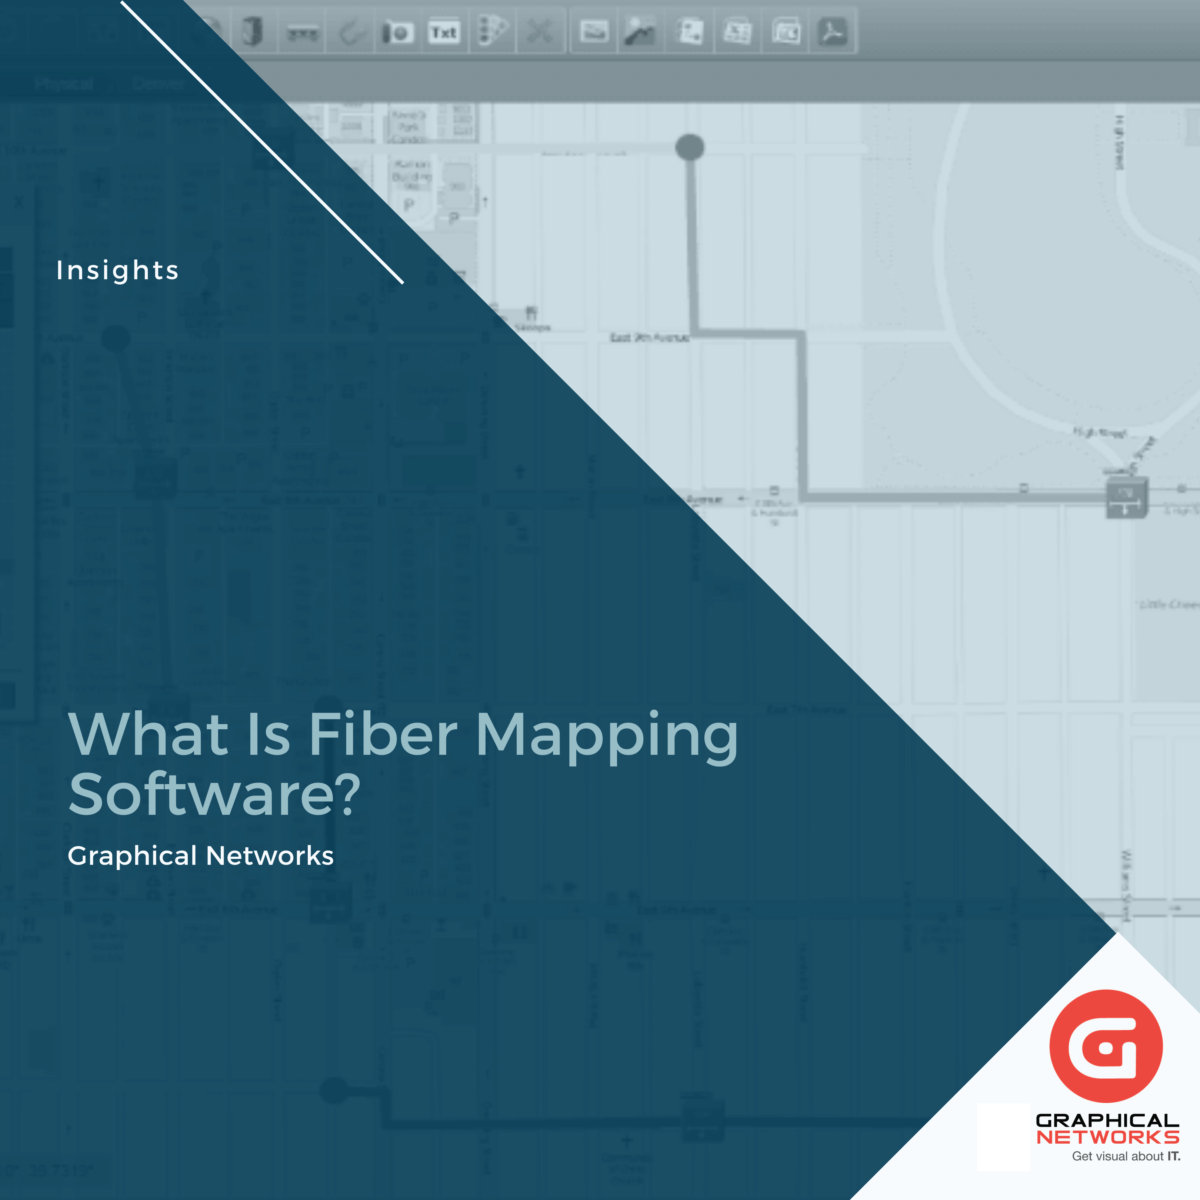 Fiber Mapping Software: What Is It?